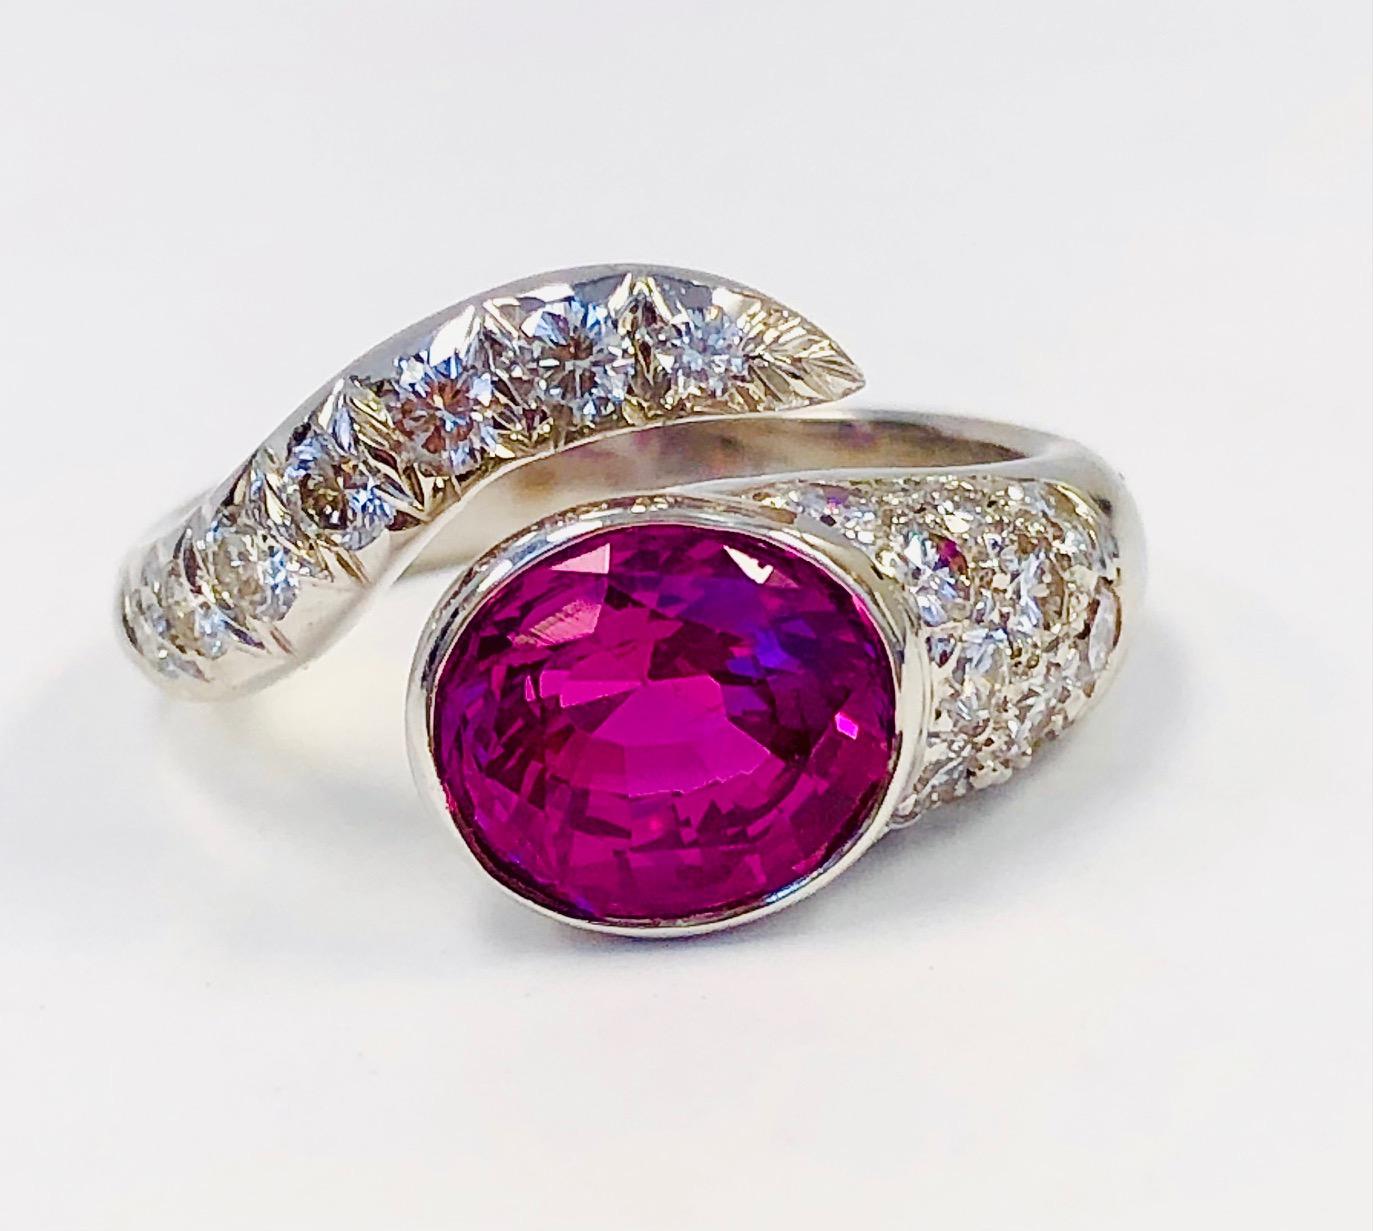 Contemporary 18 Karat White Gold Diamond and Fine 2.28 Carat Pink Sapphire For Sale